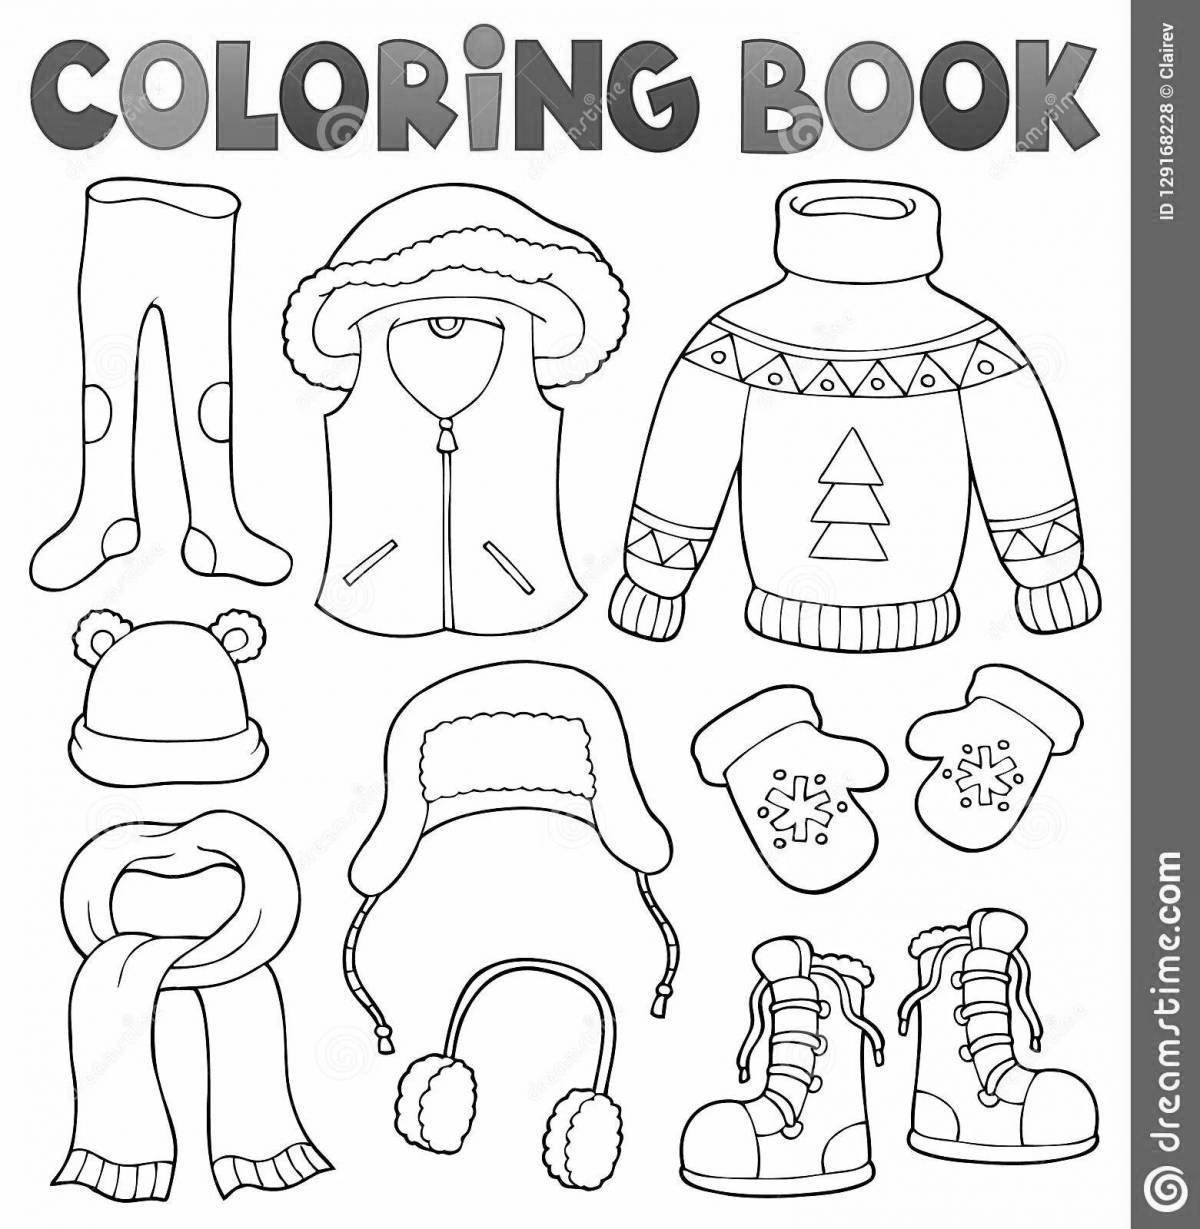 Fun coloring book for winter clothes for children 5-6 years old